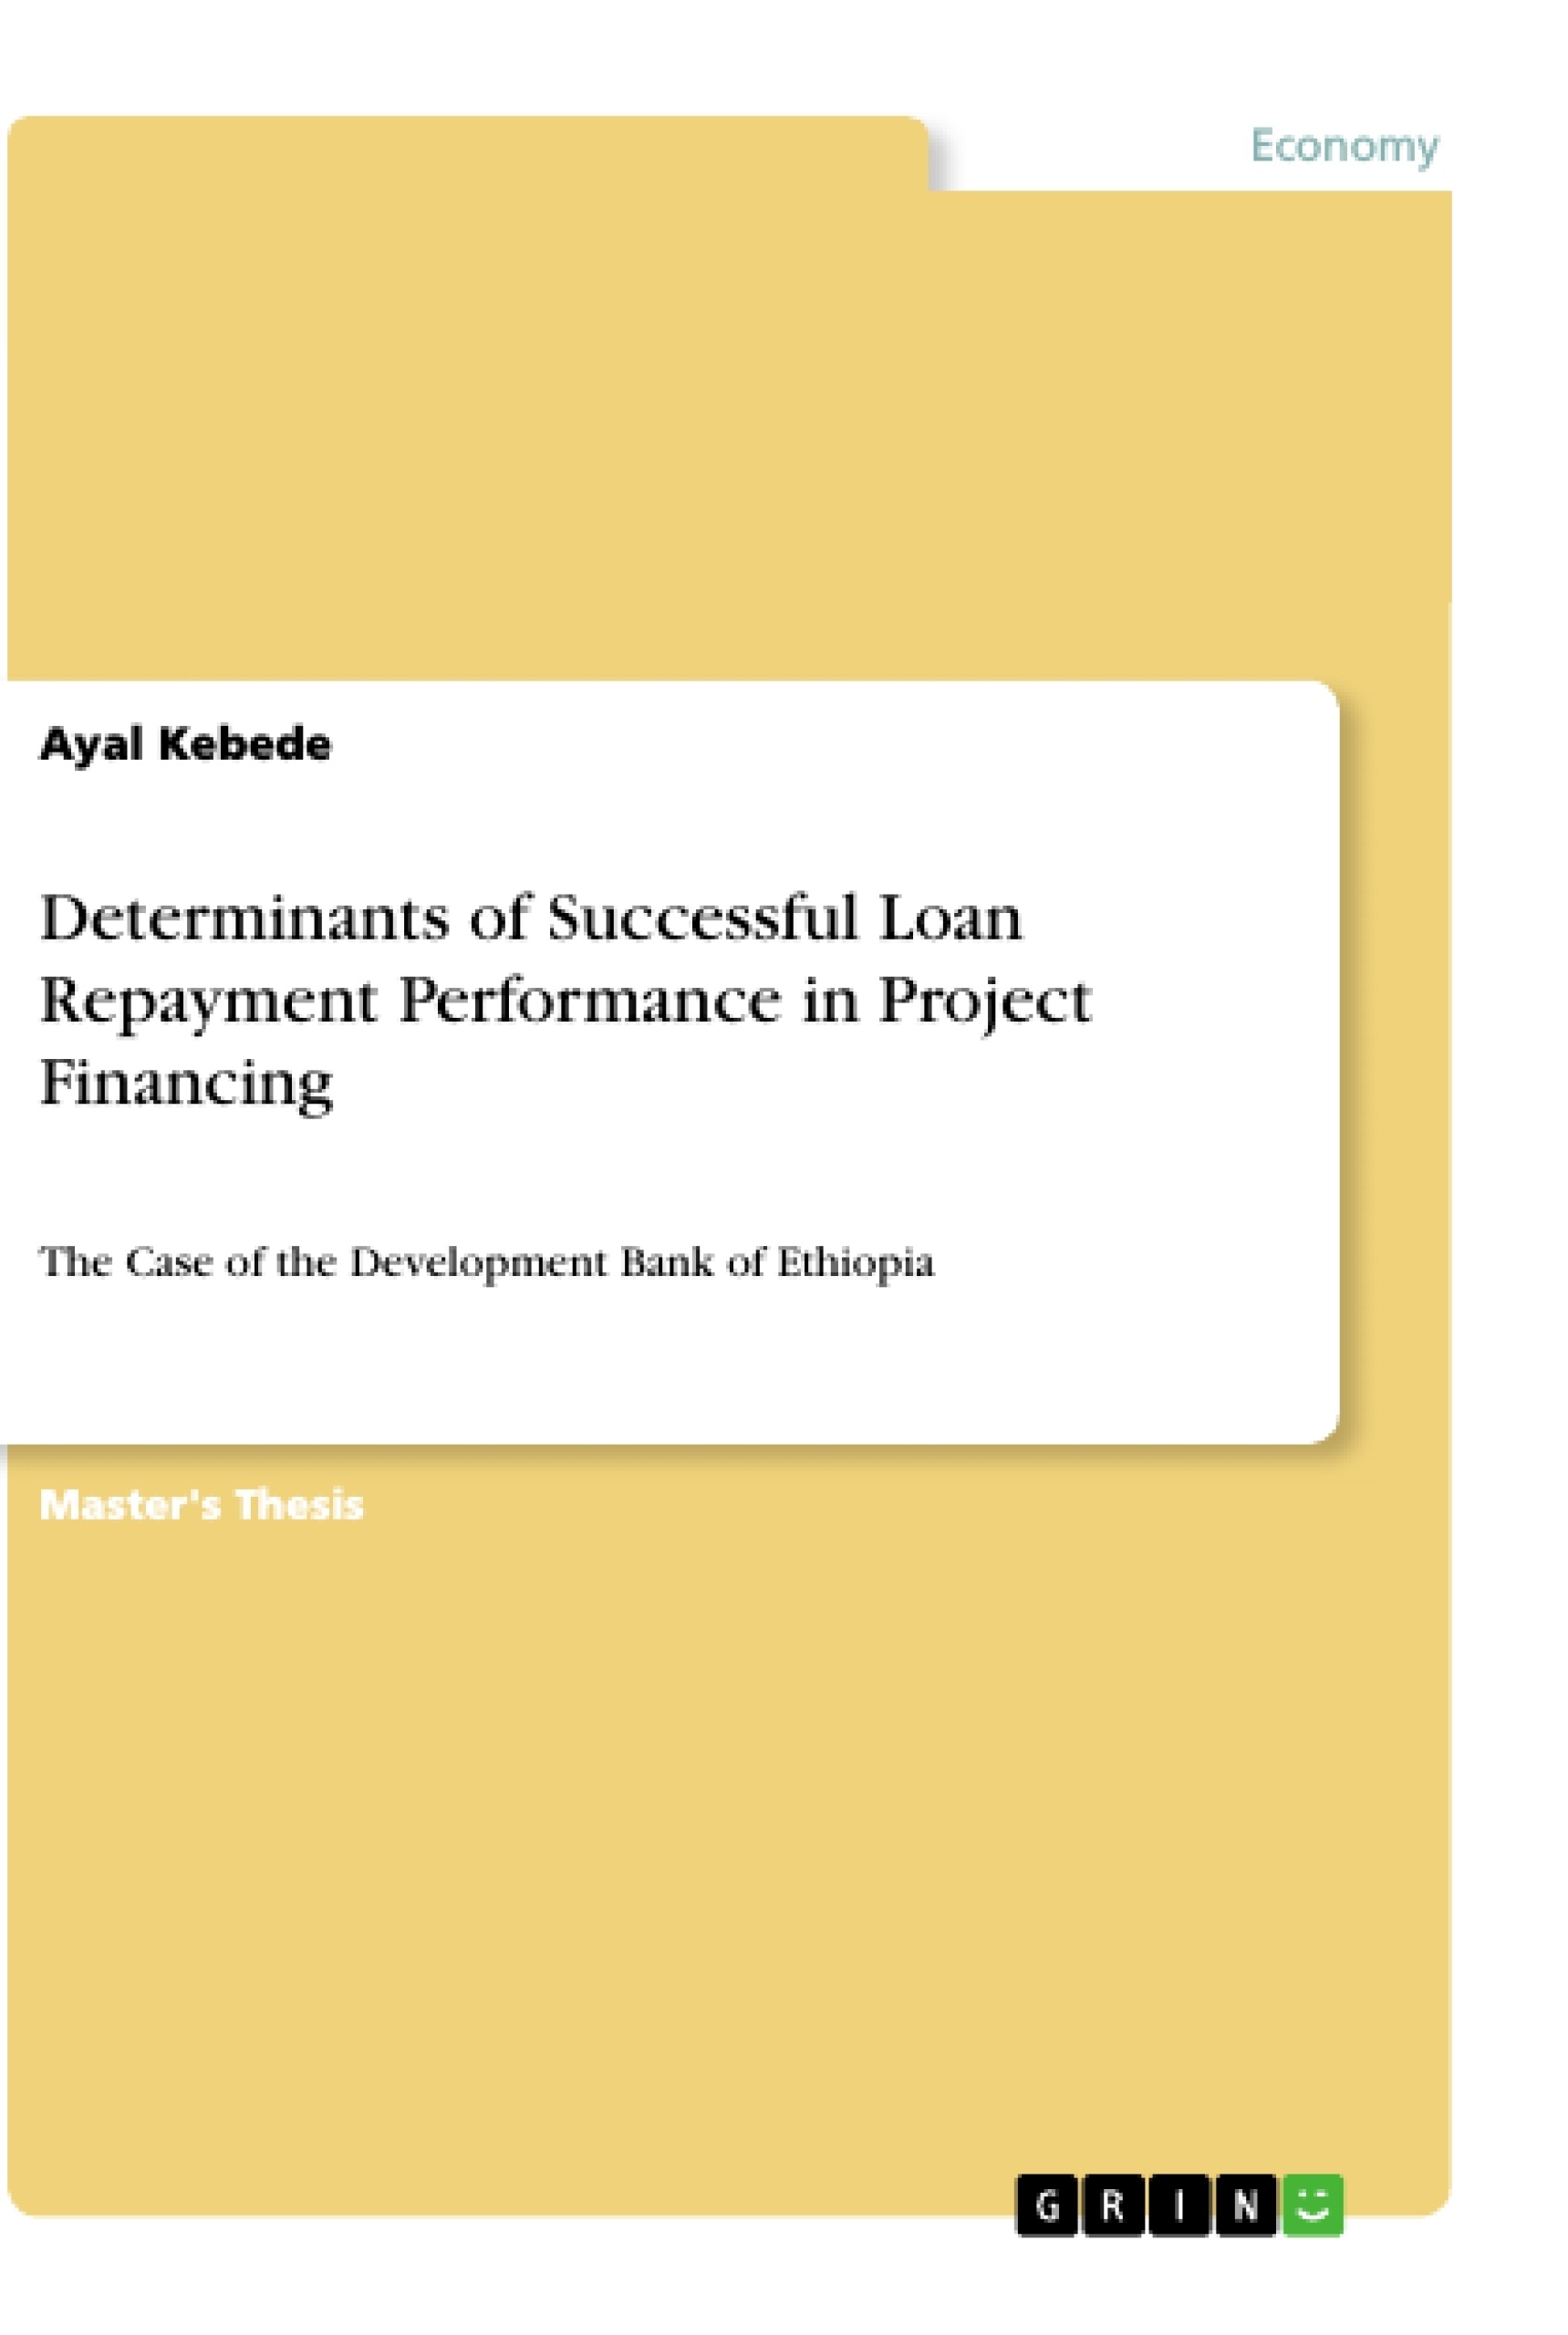 Title: Determinants of Successful Loan Repayment Performance in Project Financing